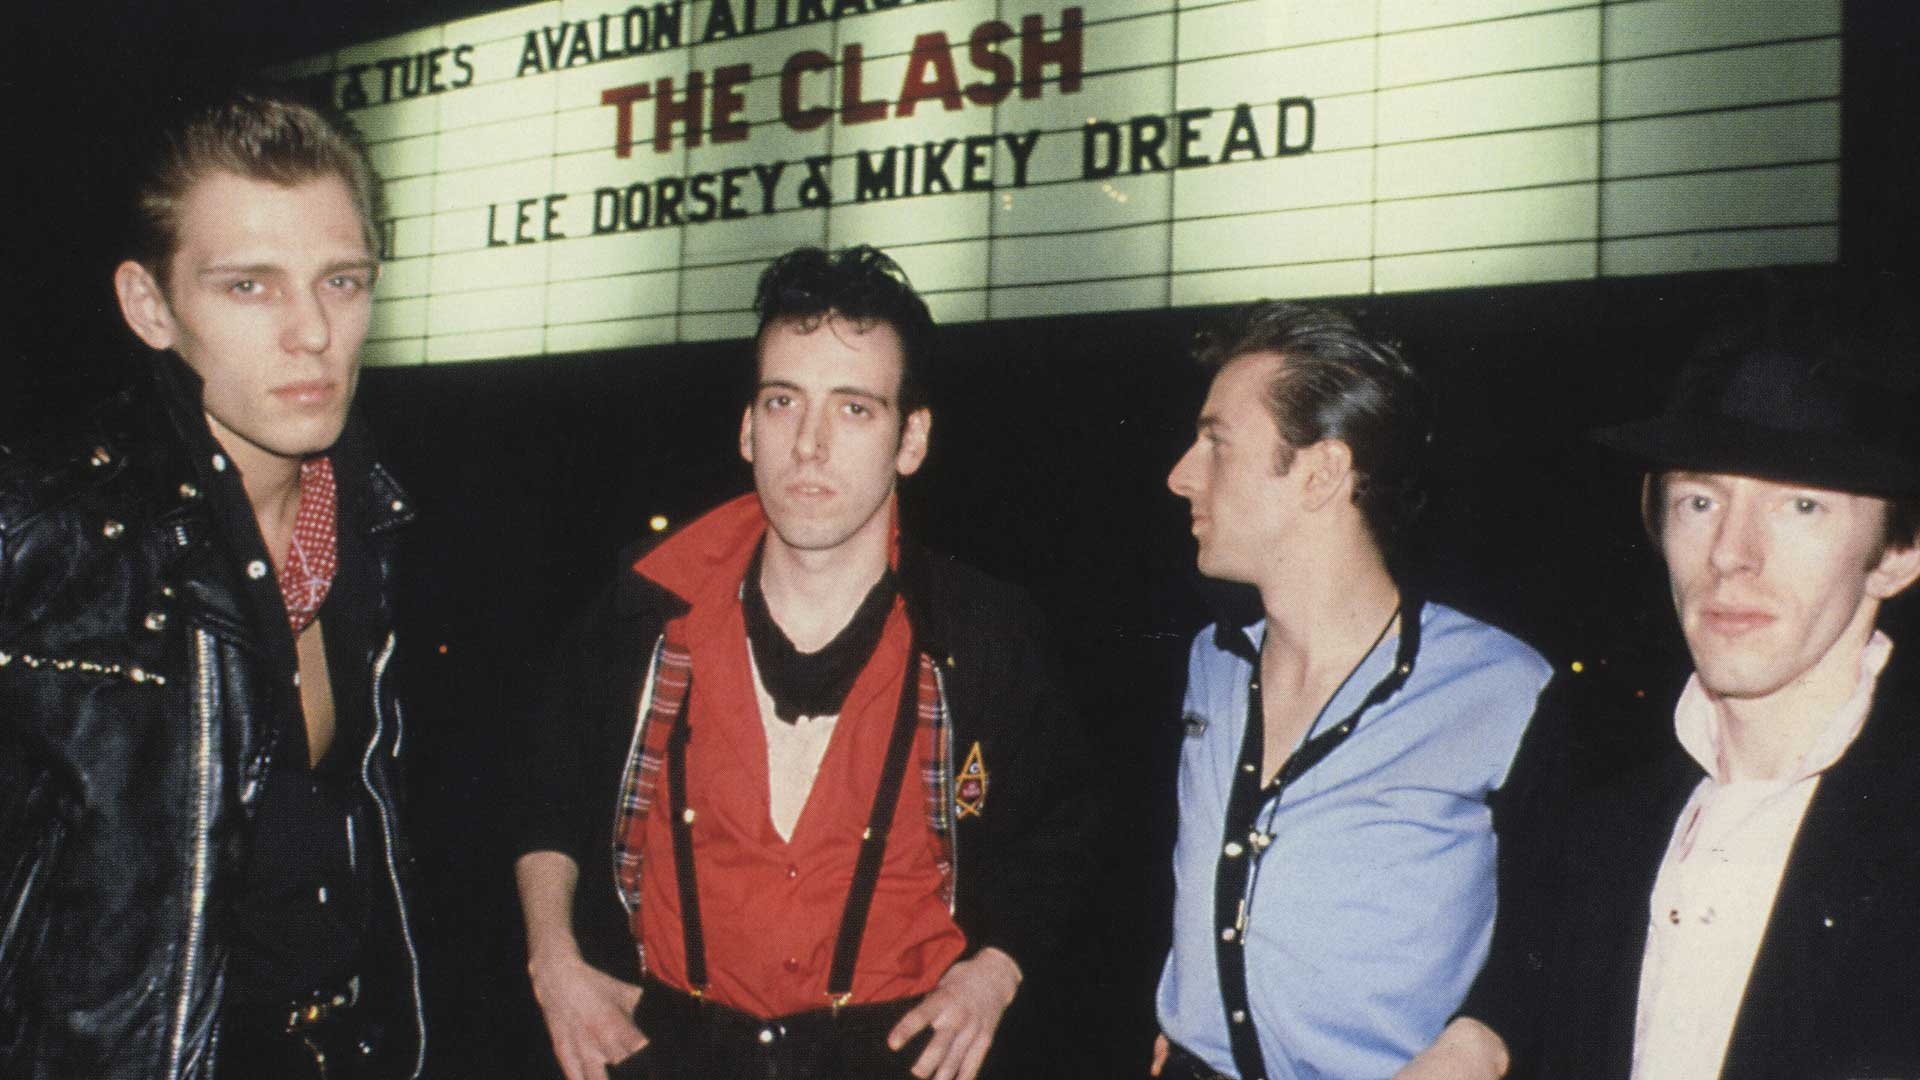 The Clash's fashion influence, Modernist style, Rebellion through clothing, Iconic band aesthetic, 1920x1080 Full HD Desktop